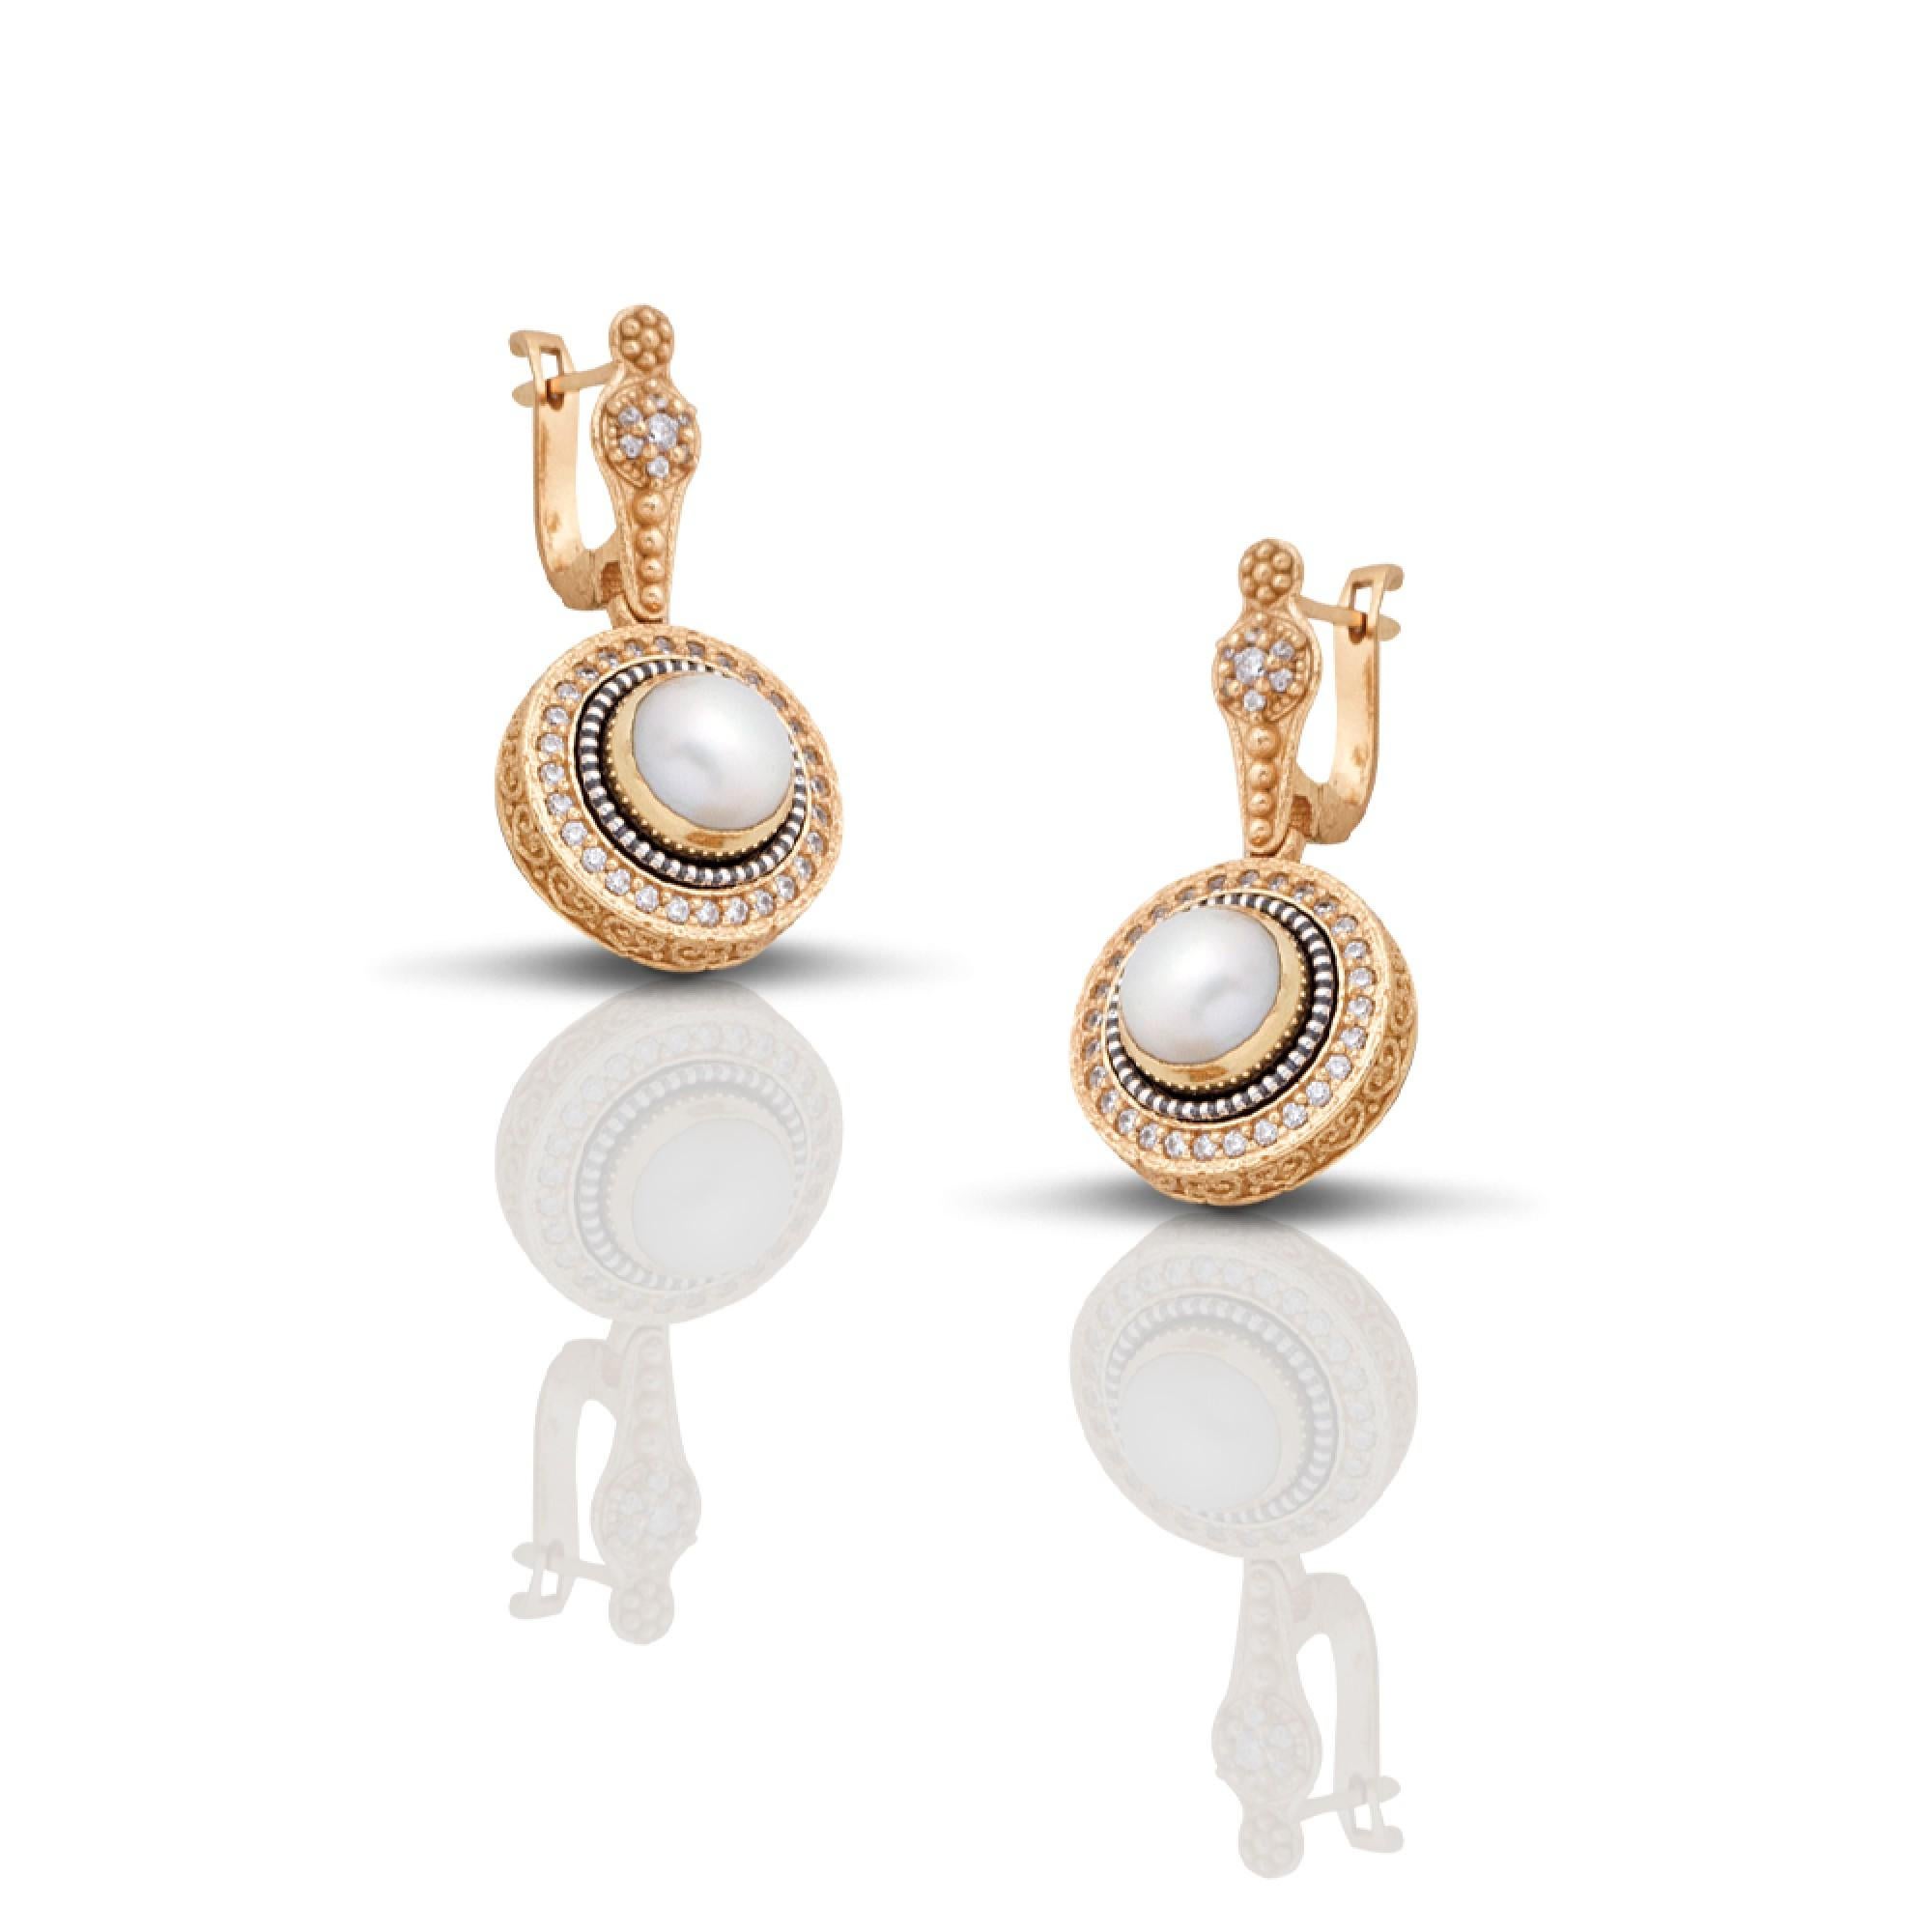 Byzantine Drop Earrings with Pearls and Zircon Stones, Dimitrios Exclusive S259 For Sale